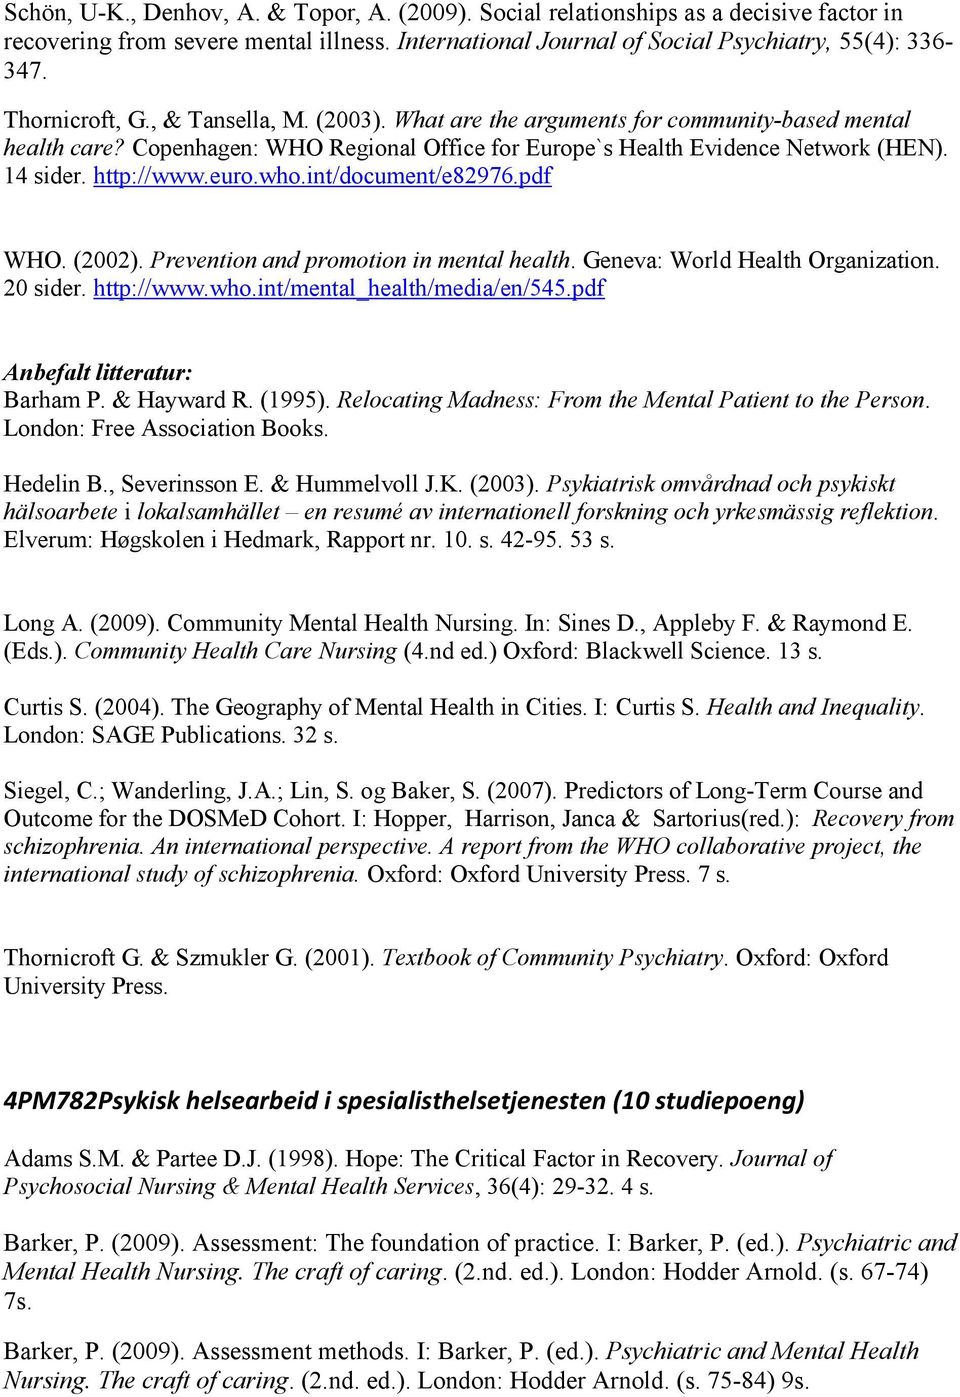 euro.who.int/document/e82976.pdf WHO. (2002). Prevention and promotion in mental health. Geneva: World Health Organization. 20 sider. http://www.who.int/mental_health/media/en/545.pdf Barham P.